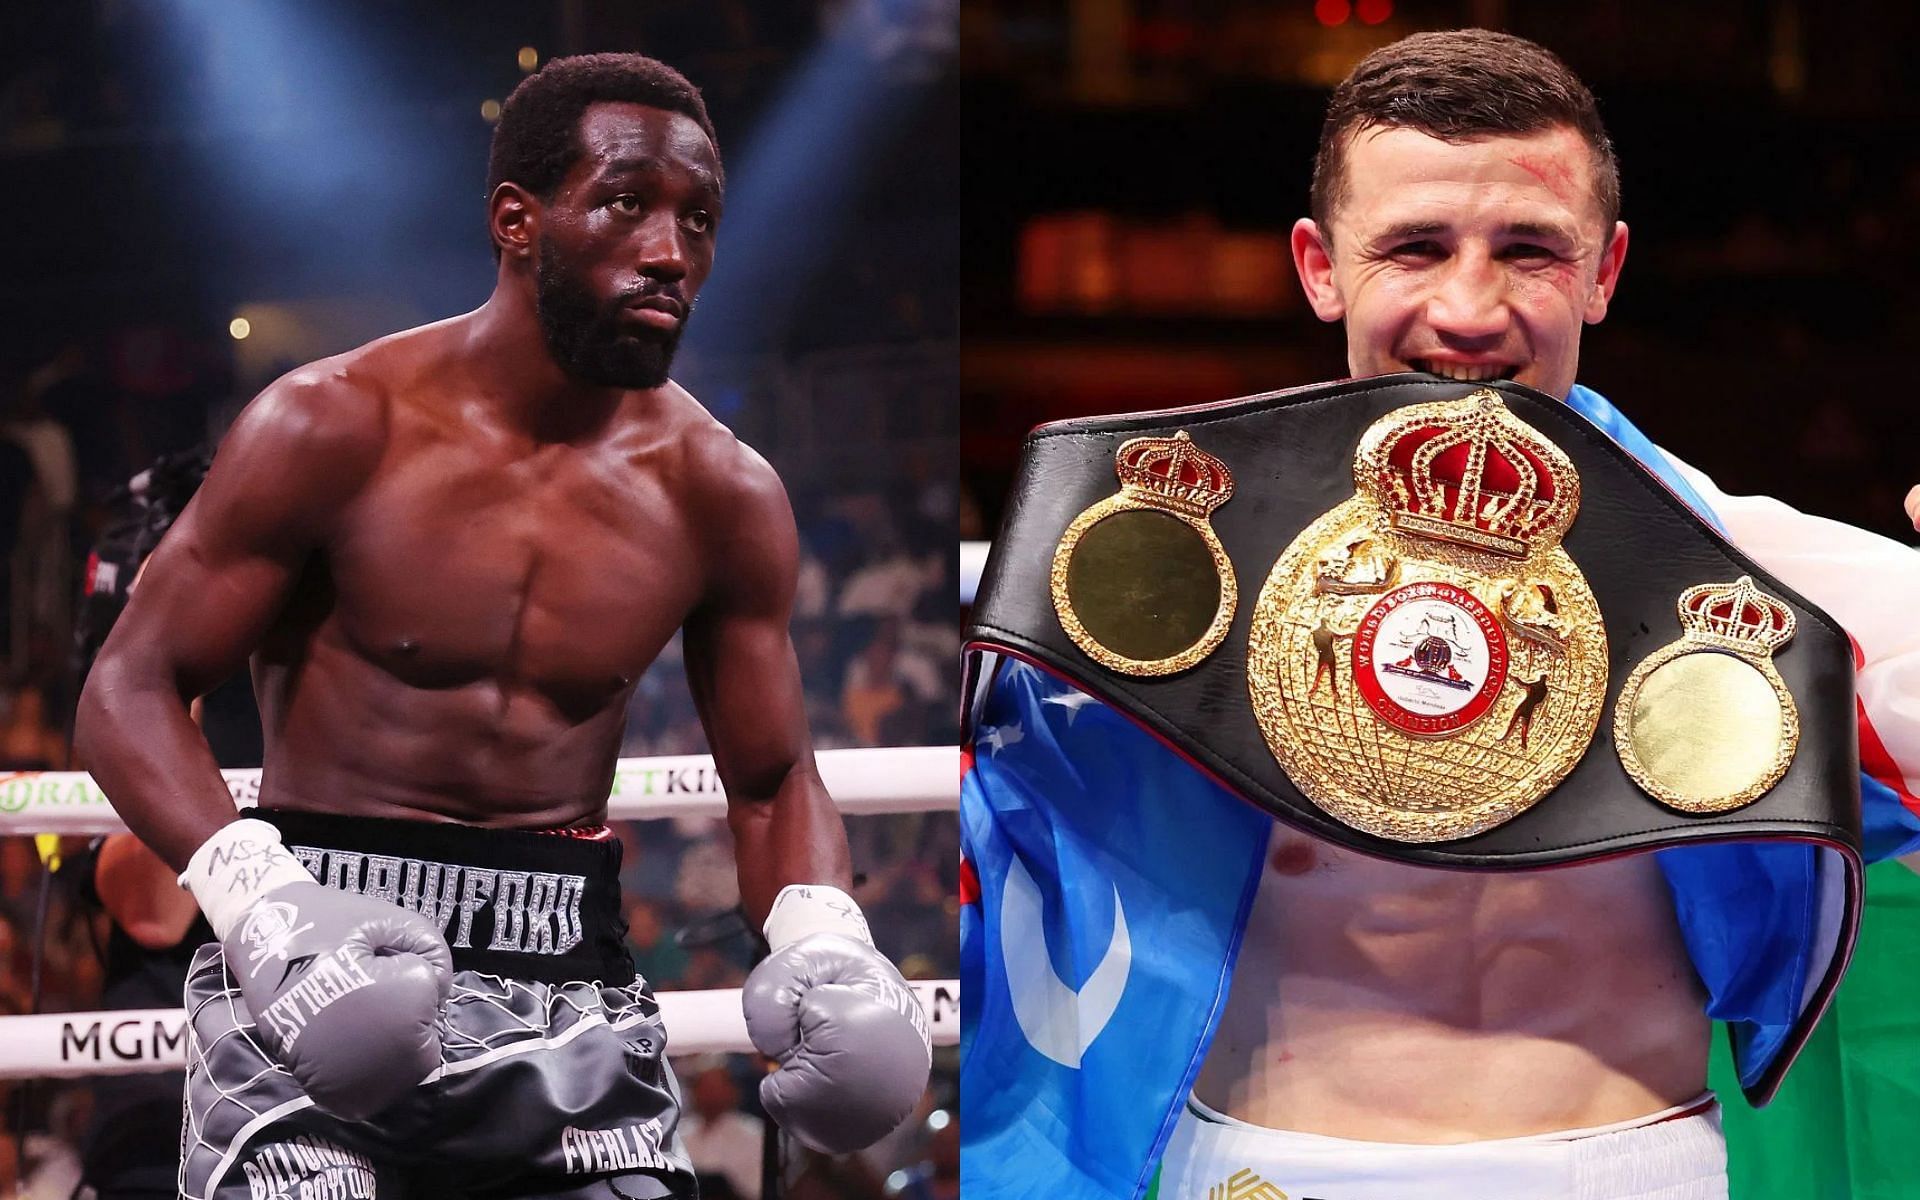 Terence Crawford (left) could come unstuck against Israil Madrimov (right) says Eddie Hearn [Images Courtesy: @GettyImages]